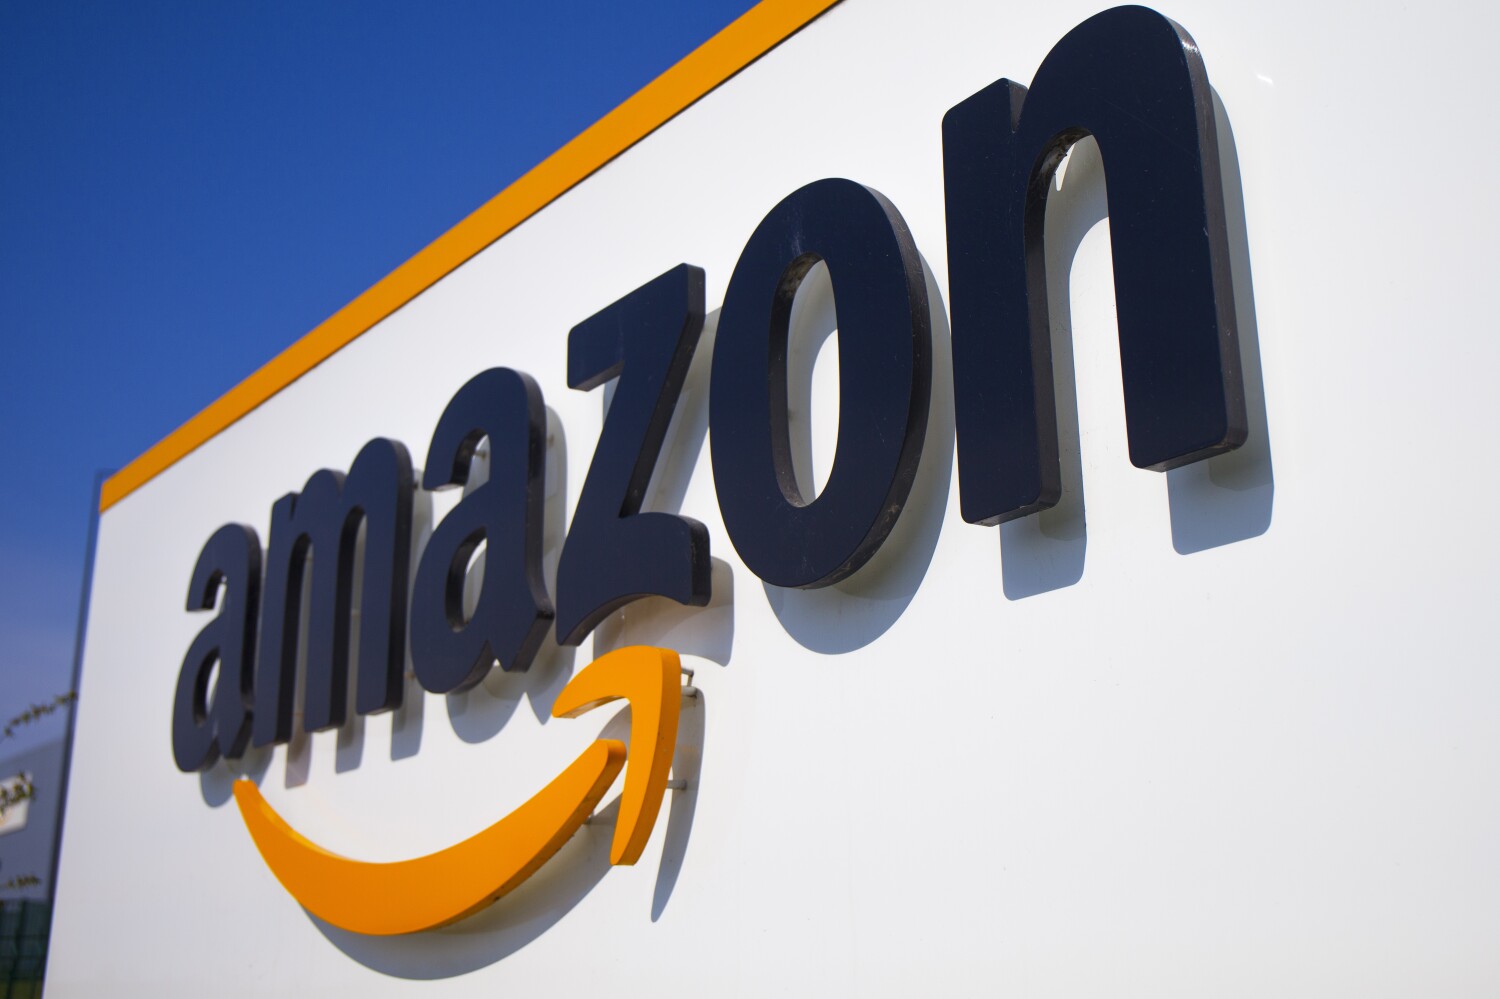 Man pleads guilty to swindling Amazon out of $1.3 million in refund scheme